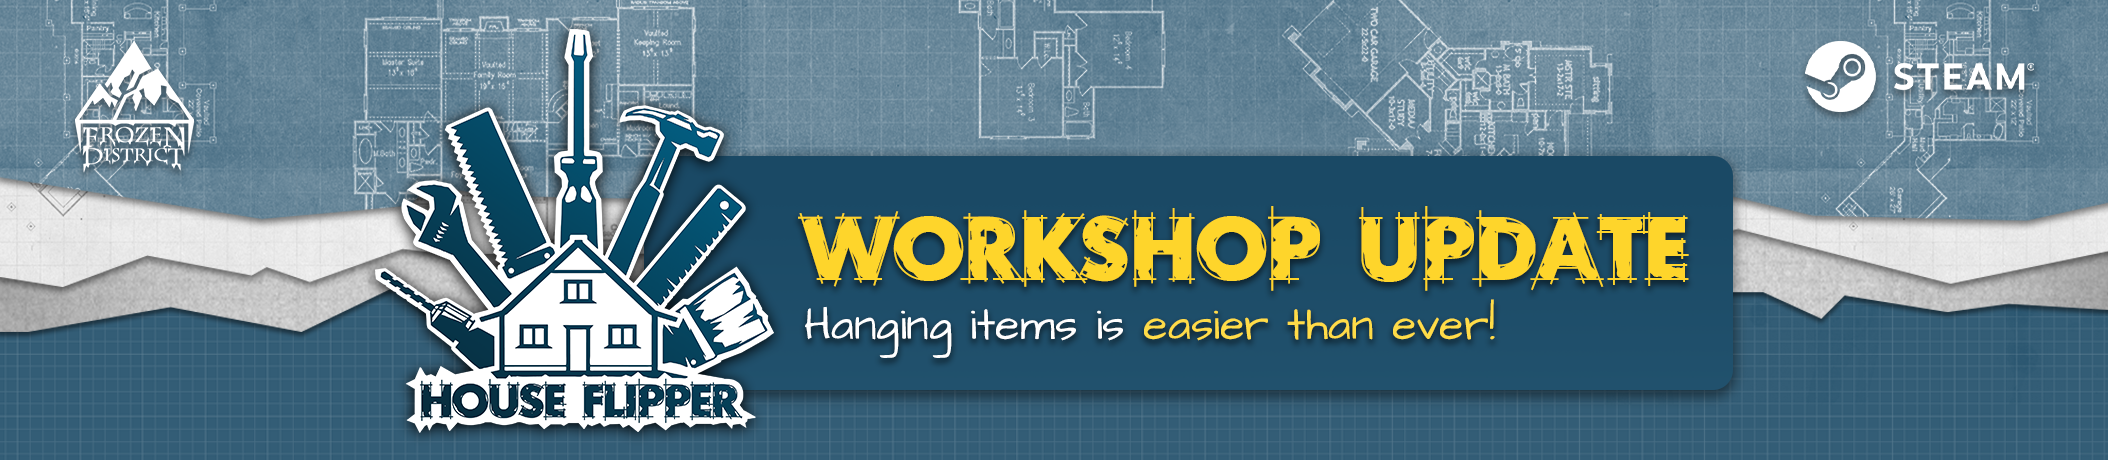 how to re steam workshop content